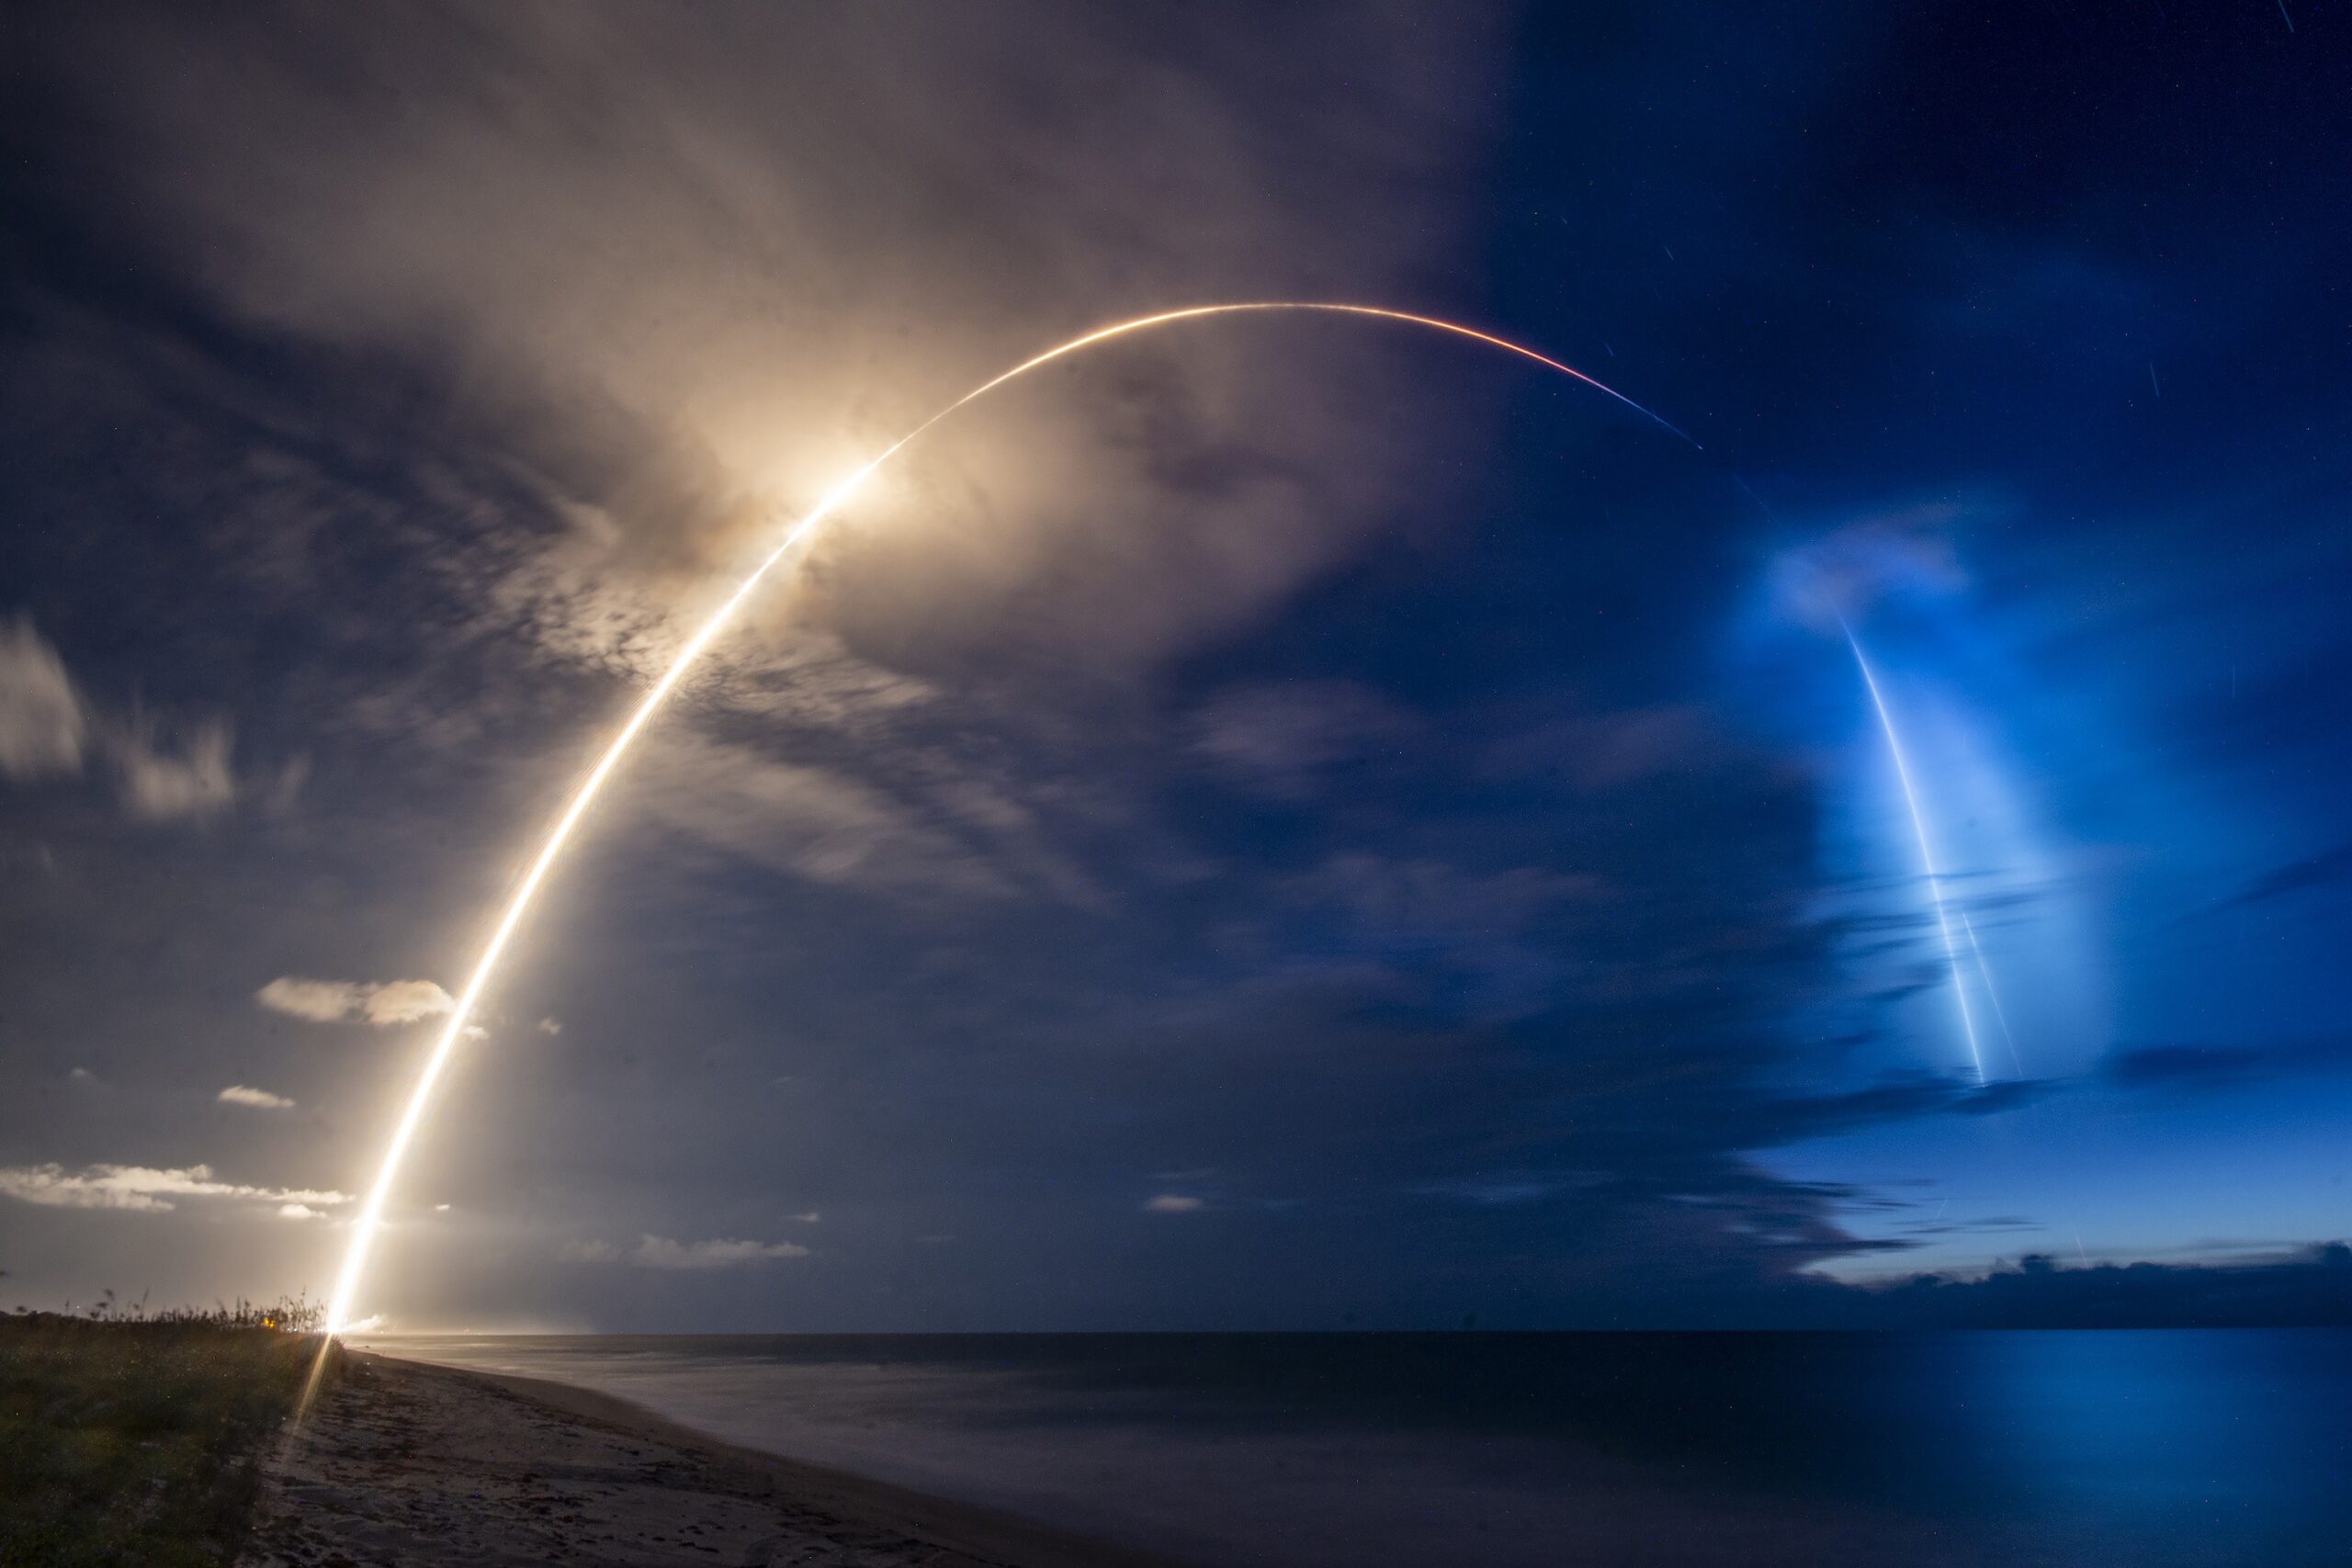 SpaceX Starlink launch, June 2020